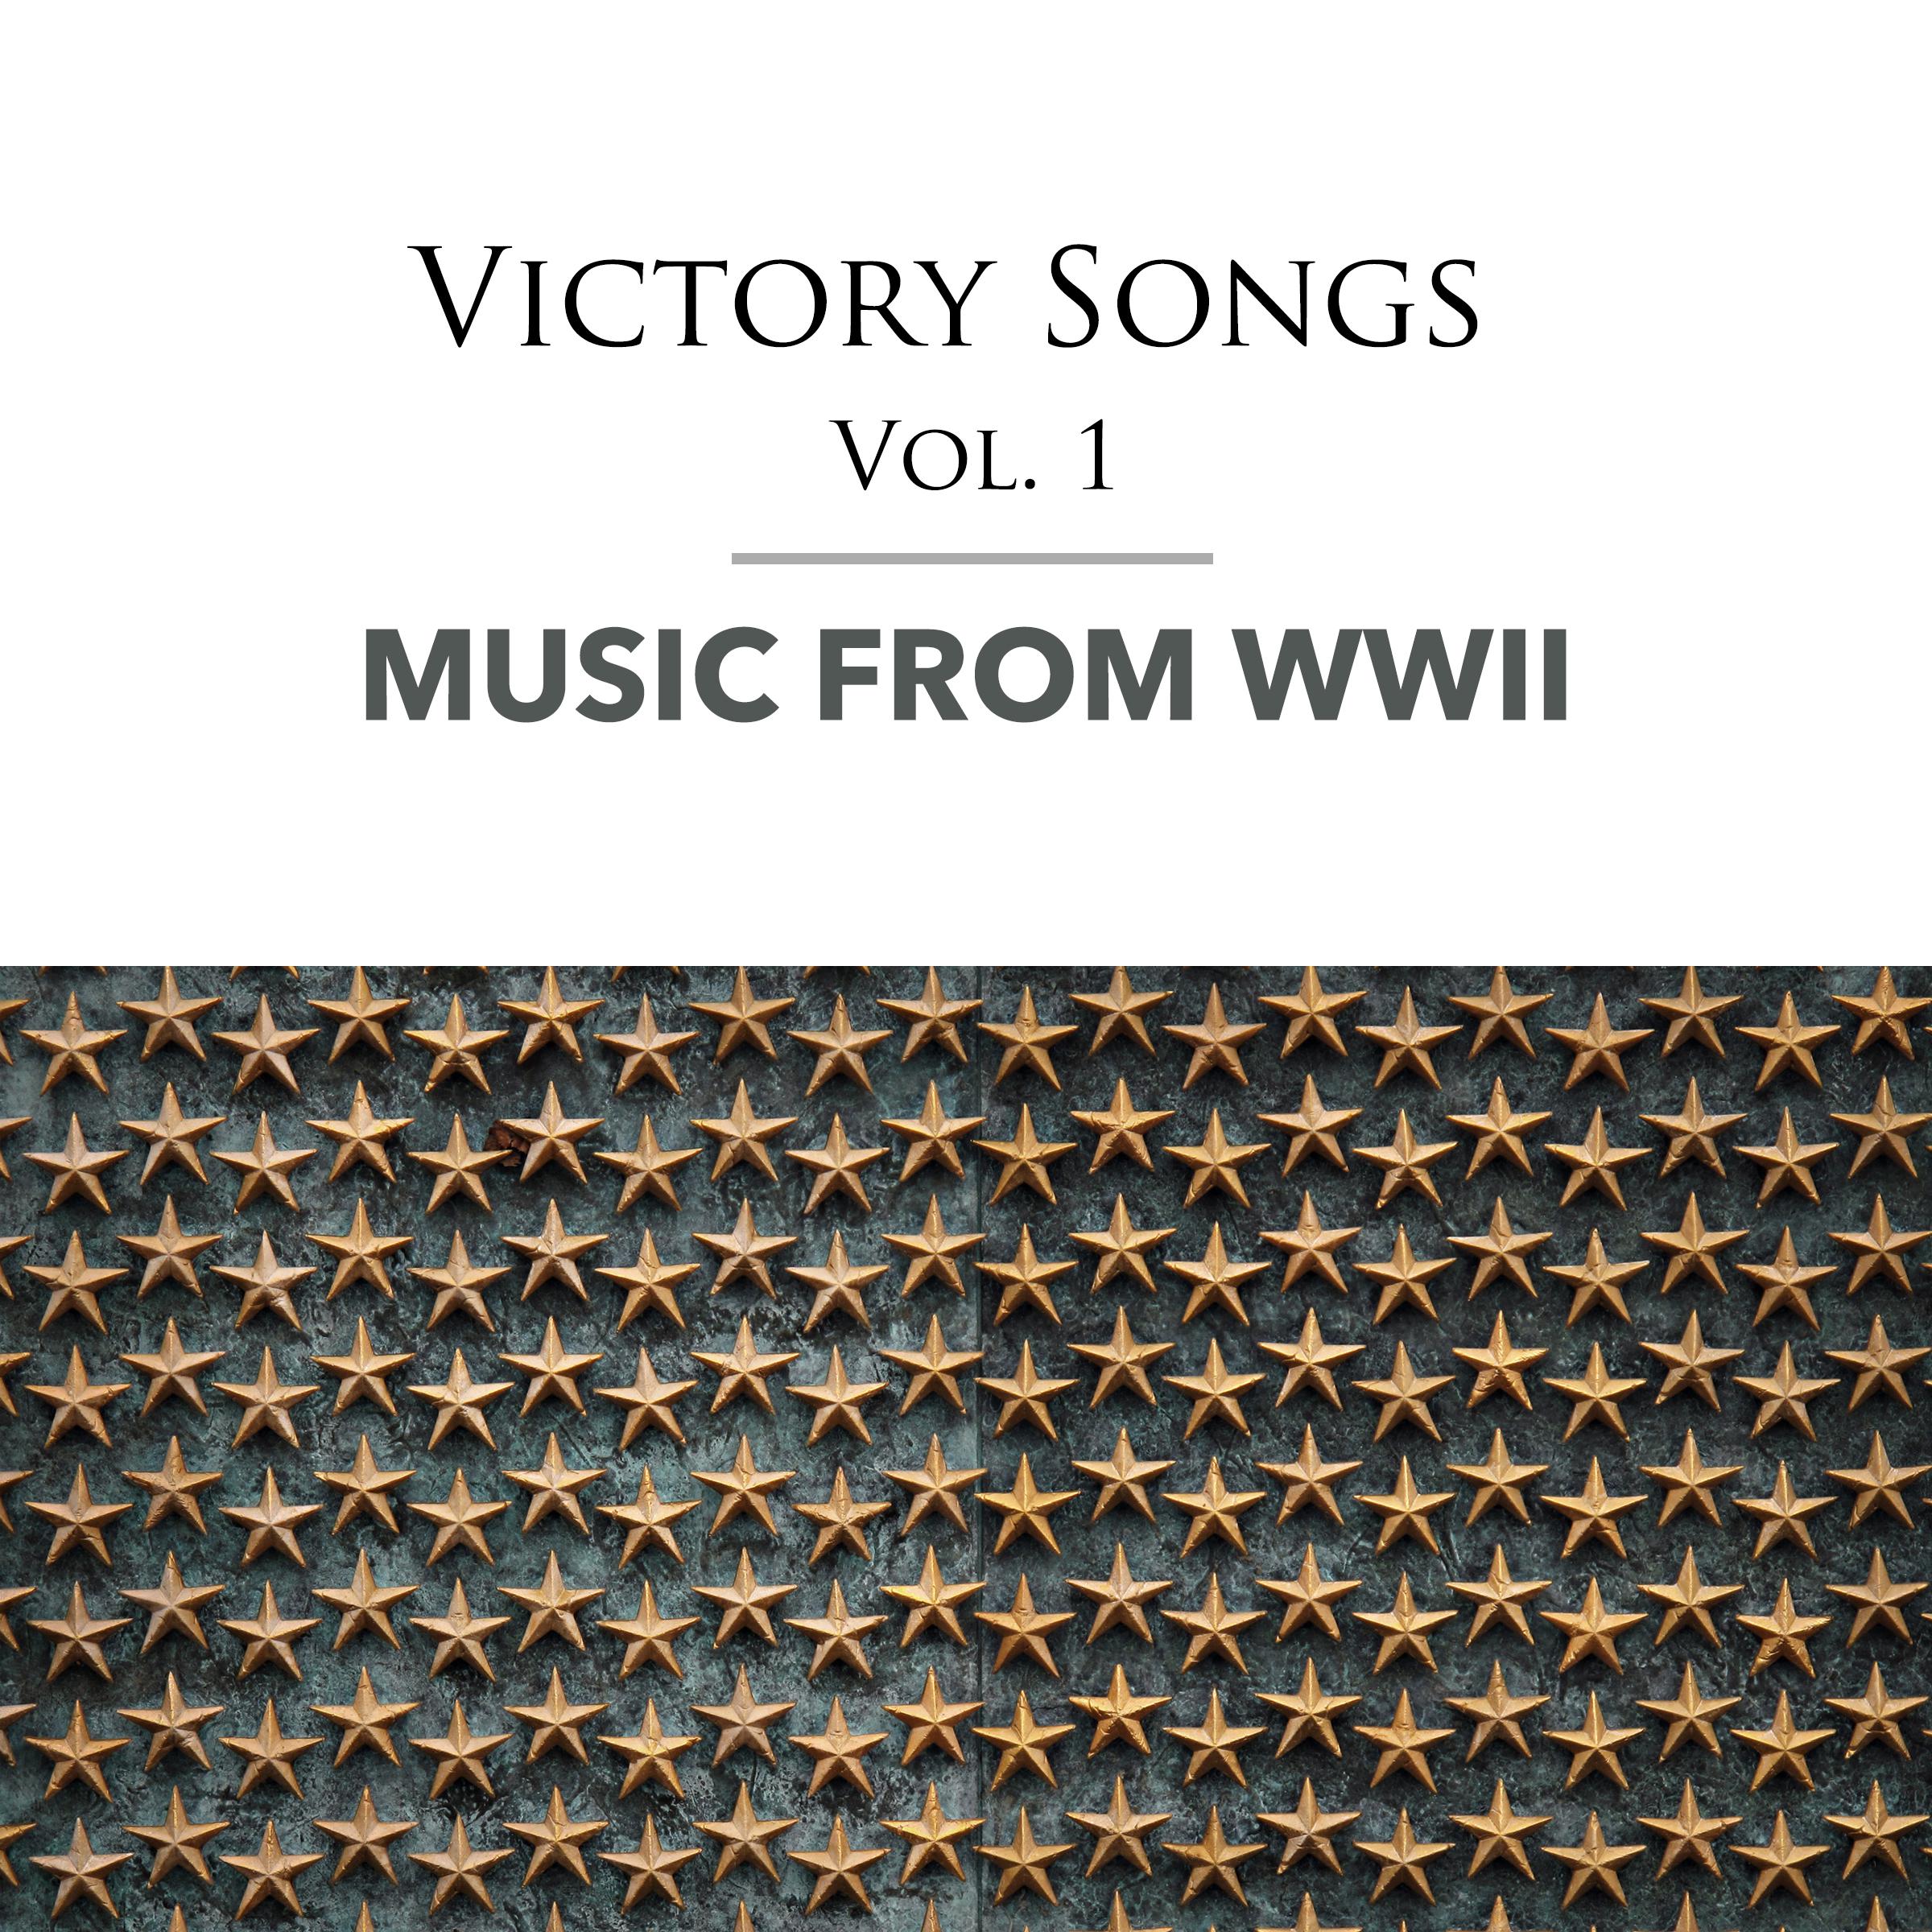 Victory Songs, Vol. 1: Music From WWII